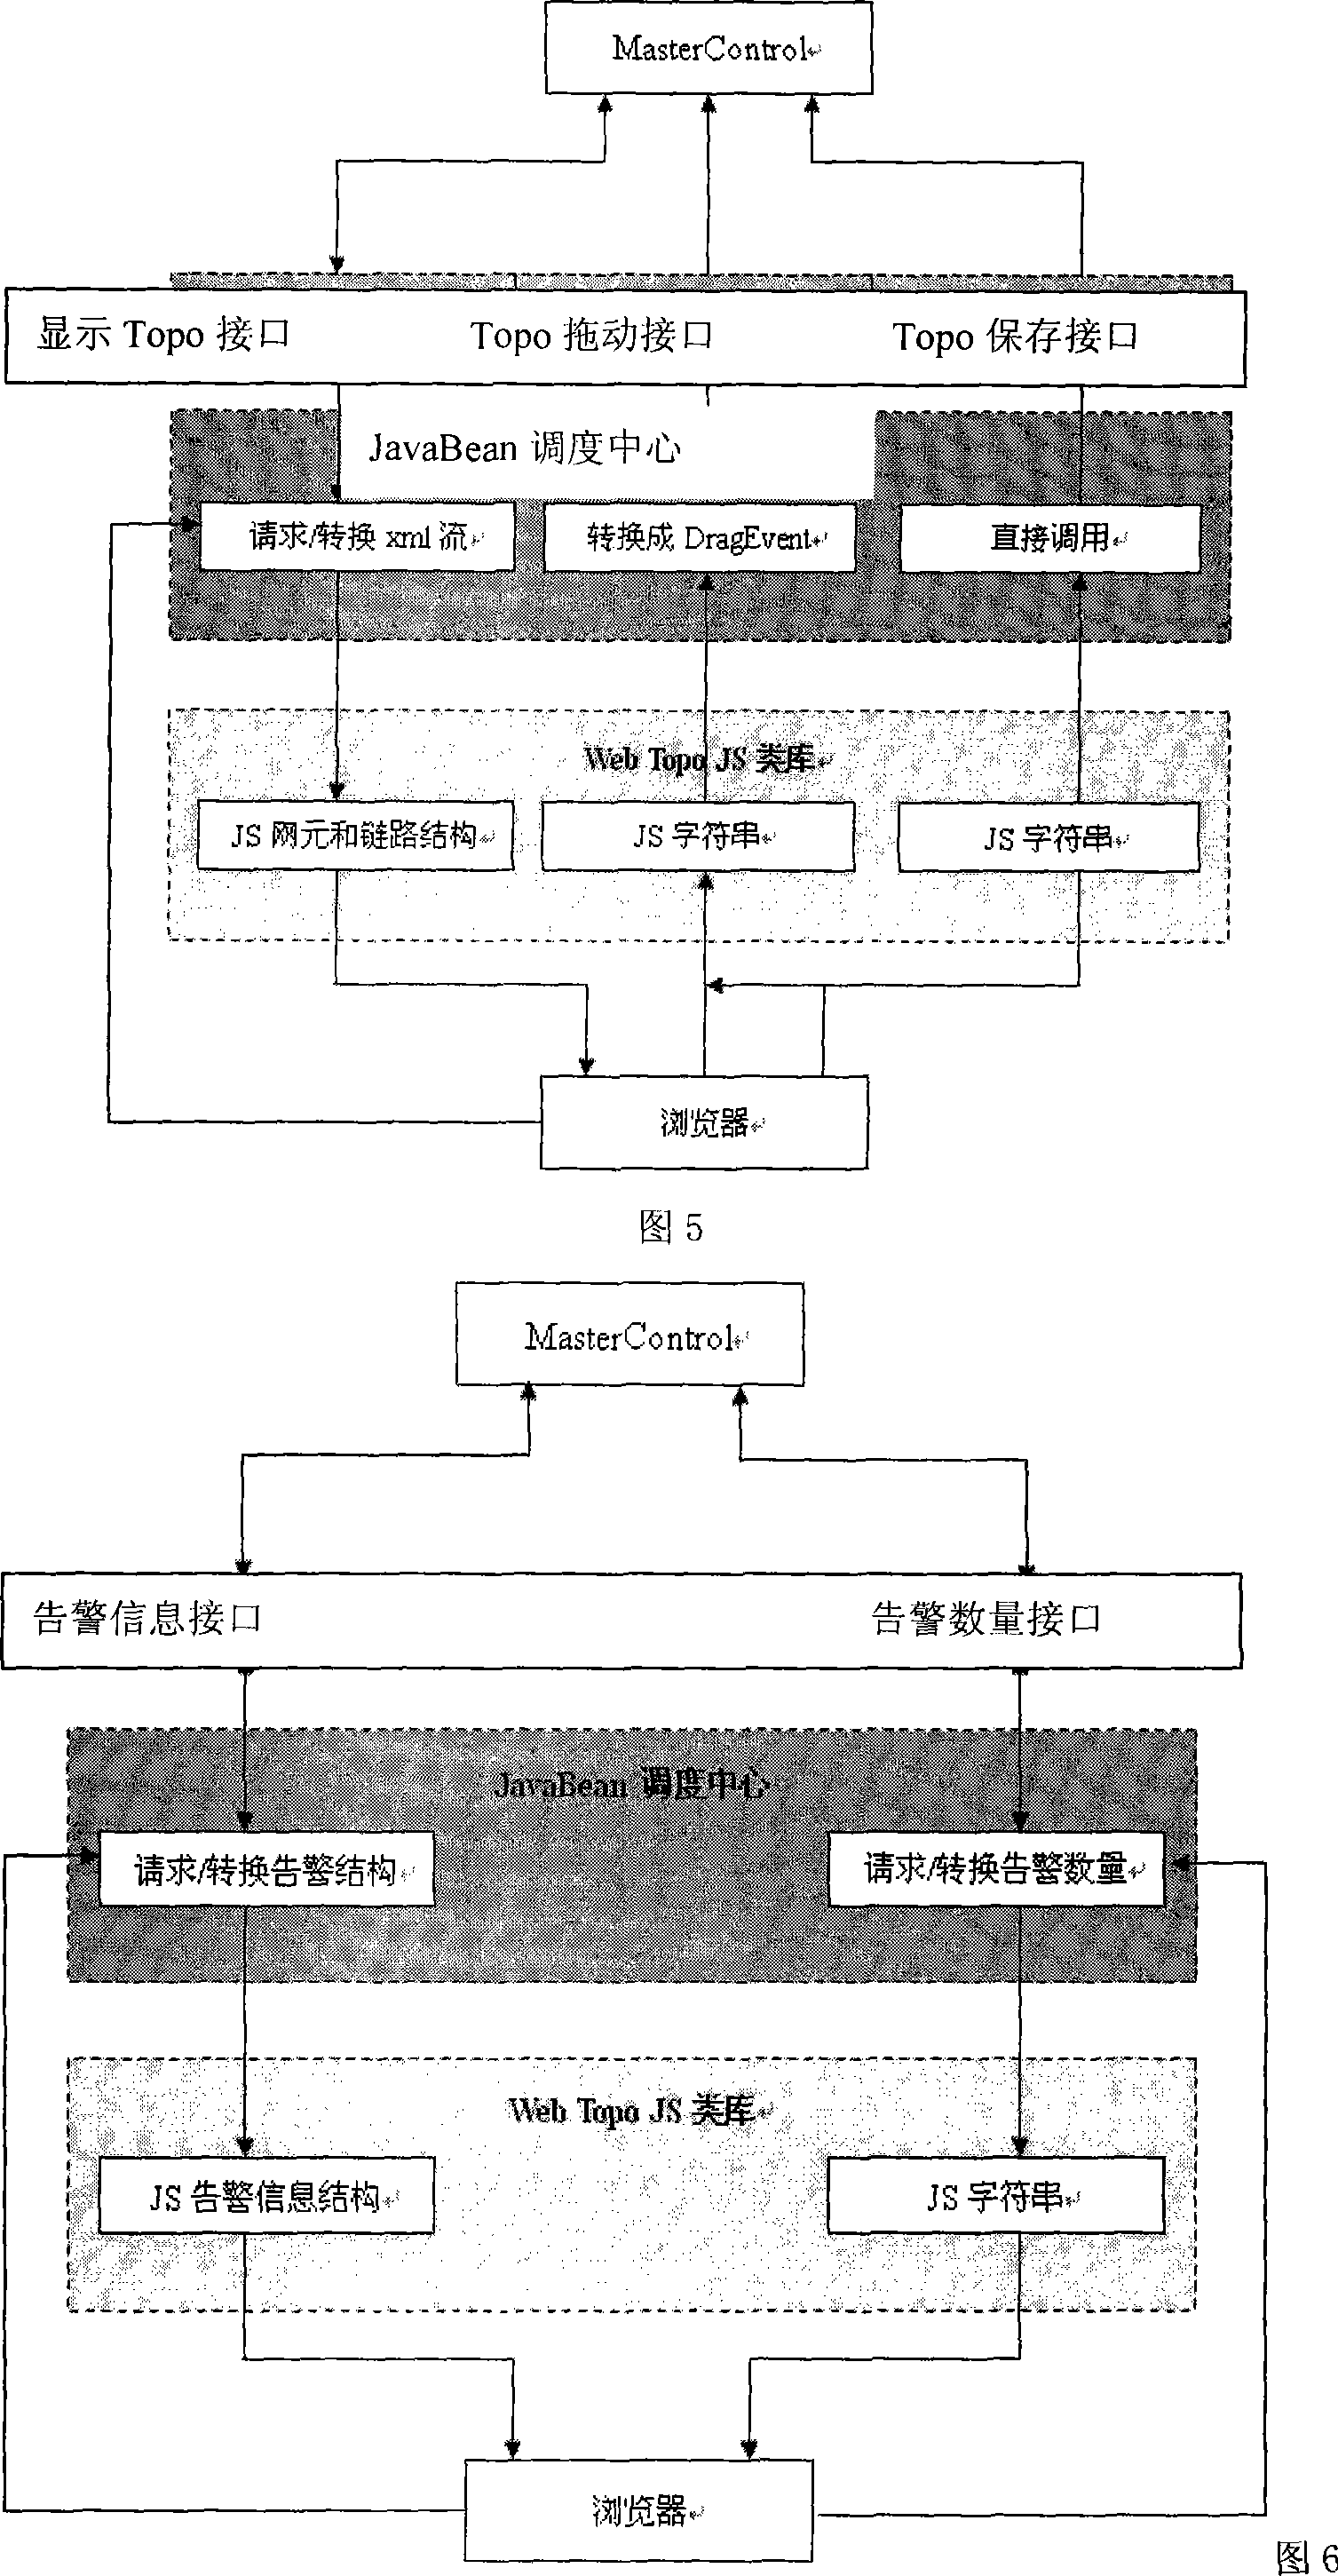 Method for video monitoring system to implement Topo map of network devices on web